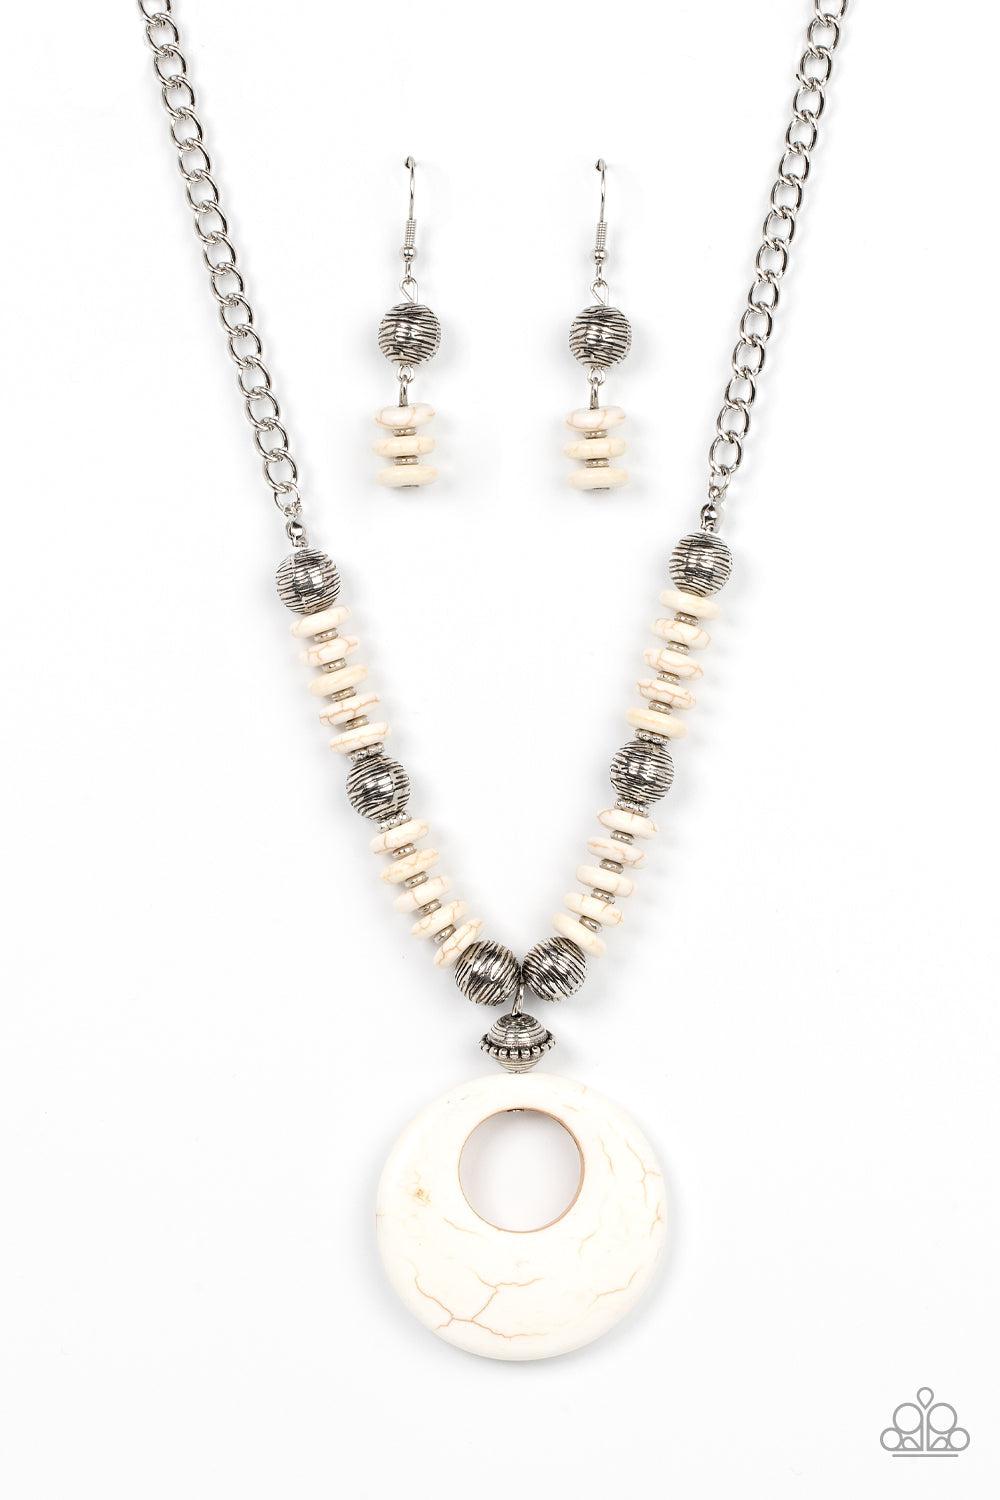 Oasis Goddess White Stone Necklace - Paparazzi Accessories- lightbox - CarasShop.com - $5 Jewelry by Cara Jewels